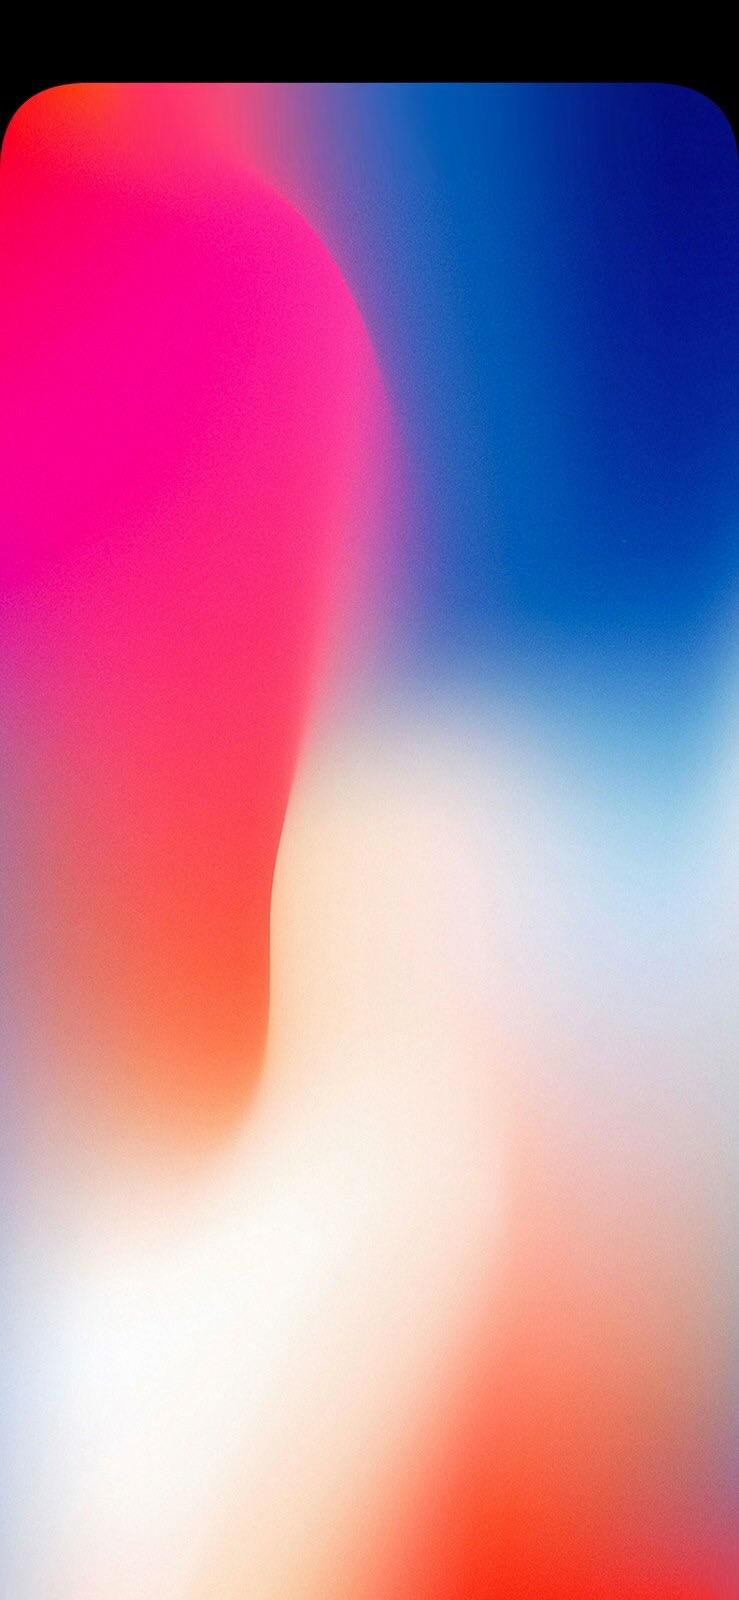 This wallpapers can make your iPhone x 'notchless' : iphone